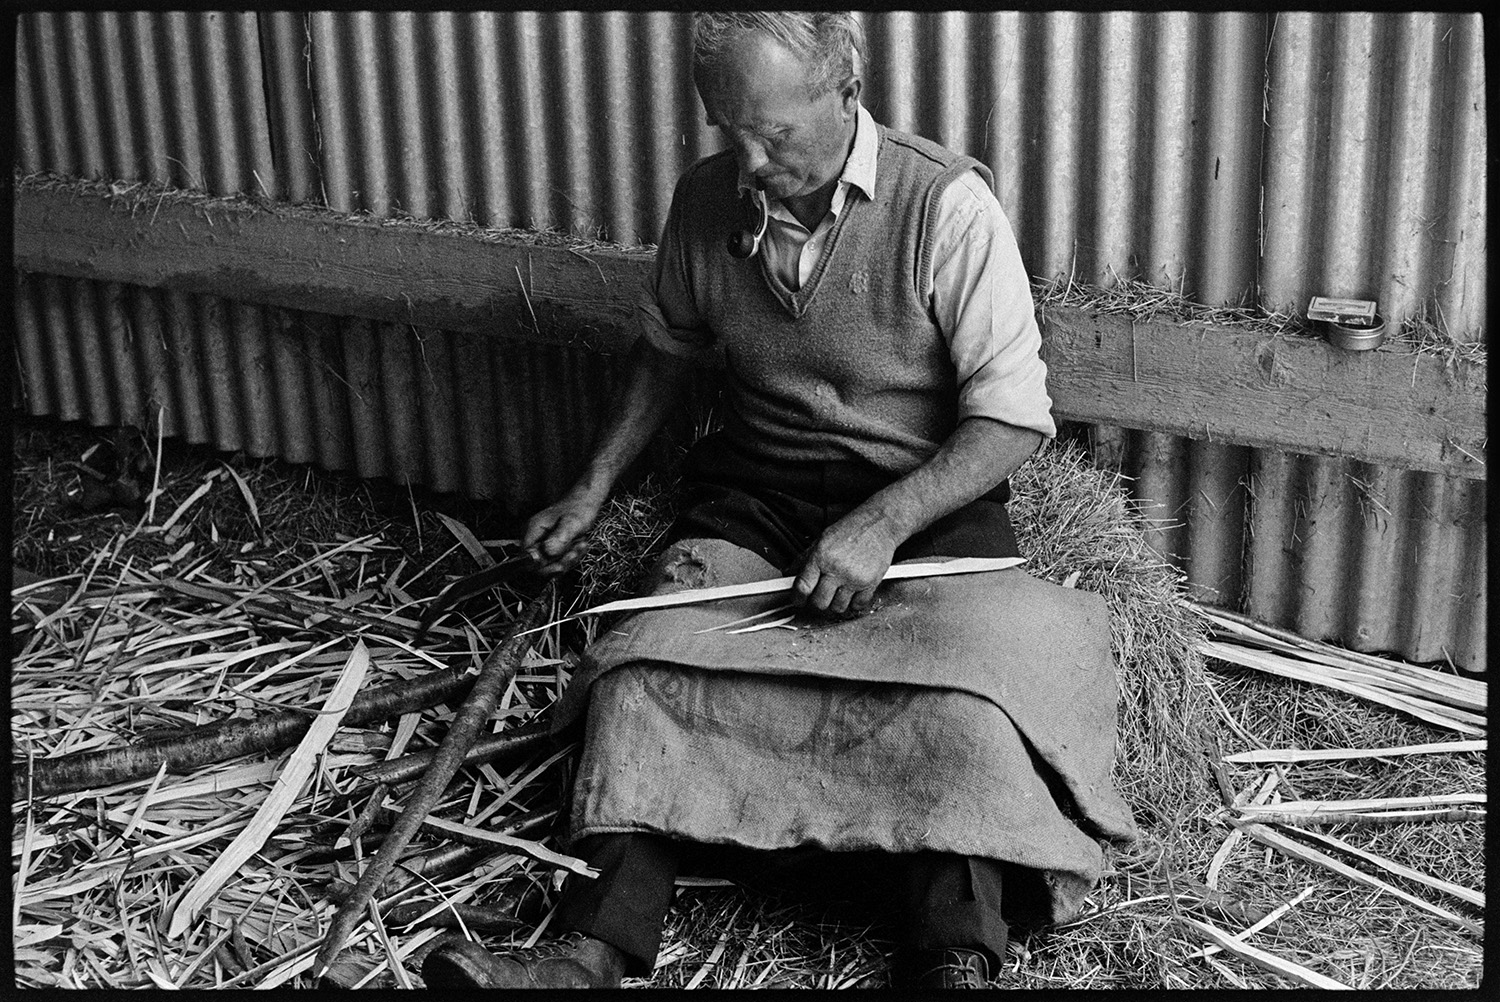 Thatcher cutting spars. 
[Bill Hammond sat on a hay bale by a corrugated iron barn sharpening spars of wood he has cut for thatching, at Newhouse, Ashreigney. He is using a small curved knife or spar hook, and has a hessian sack covering his knees.]